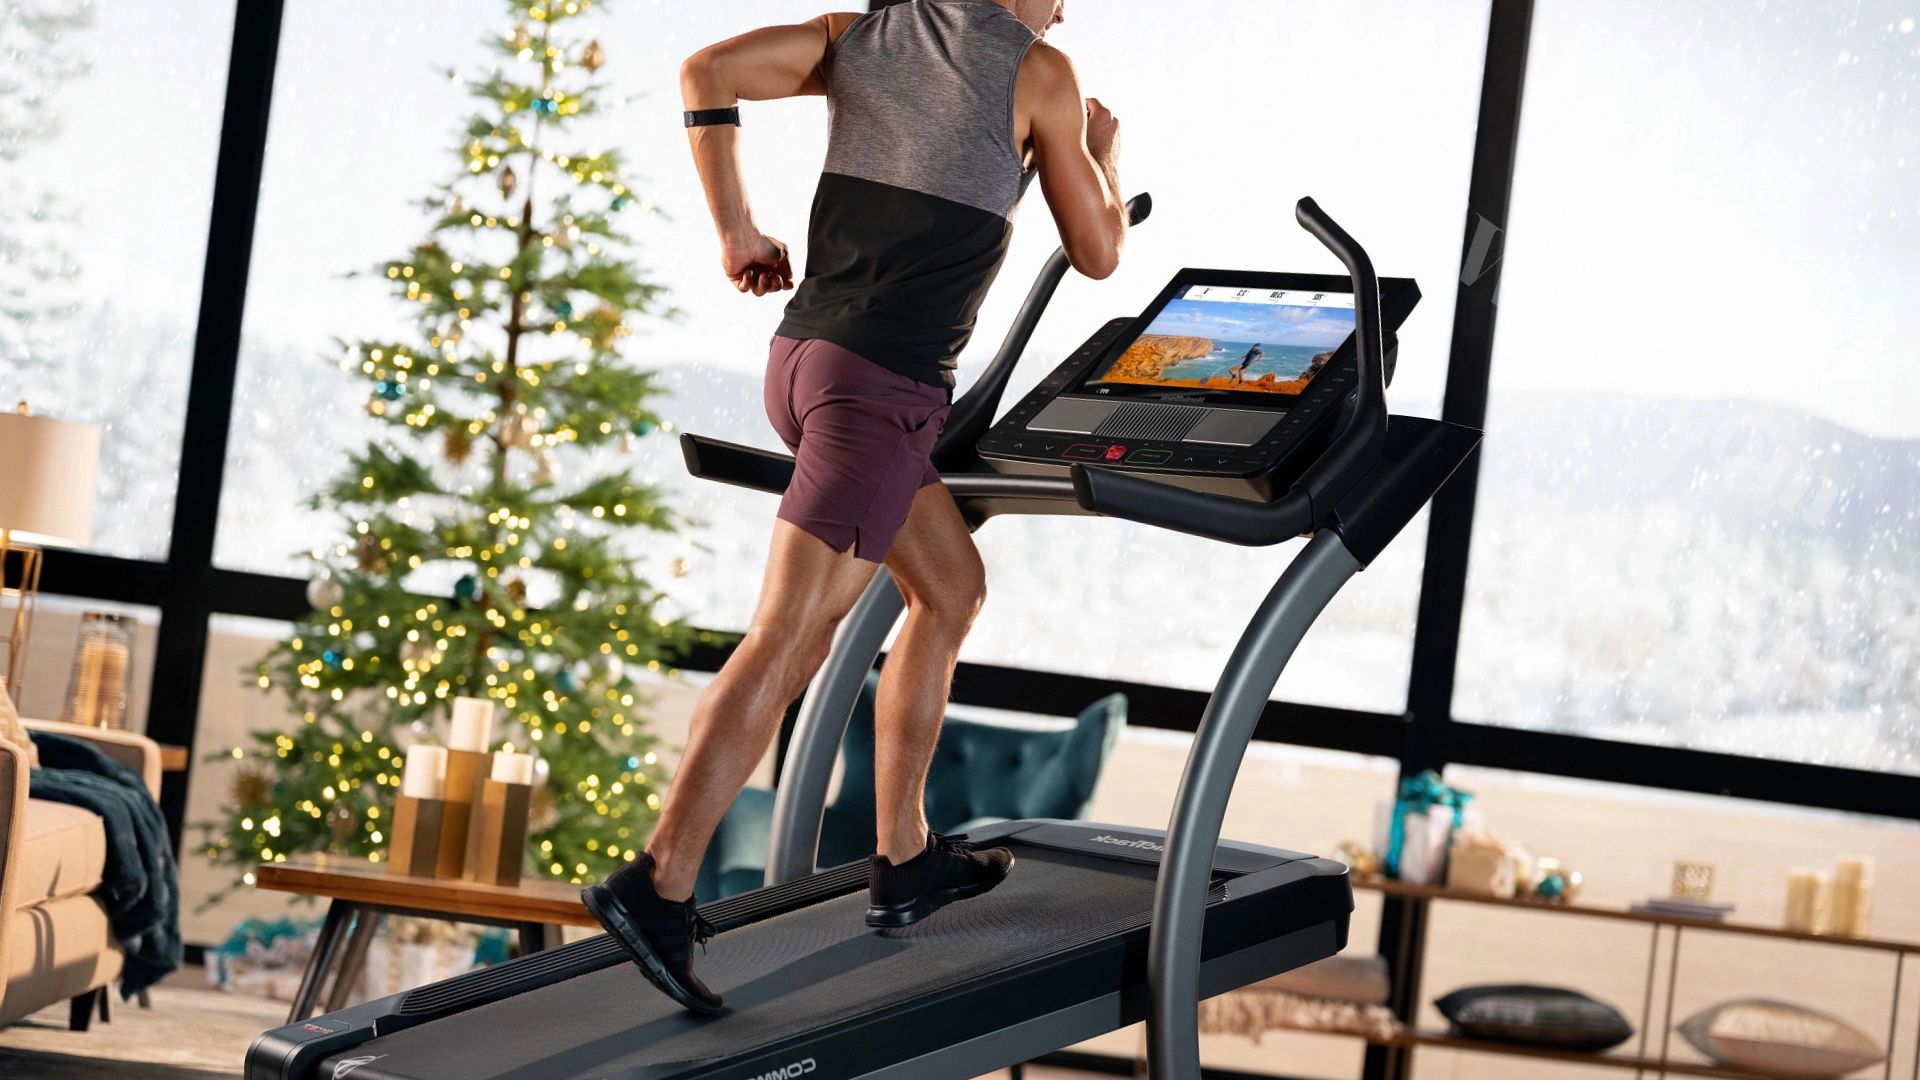 What Time of Year is Best to Buy a Treadmill?